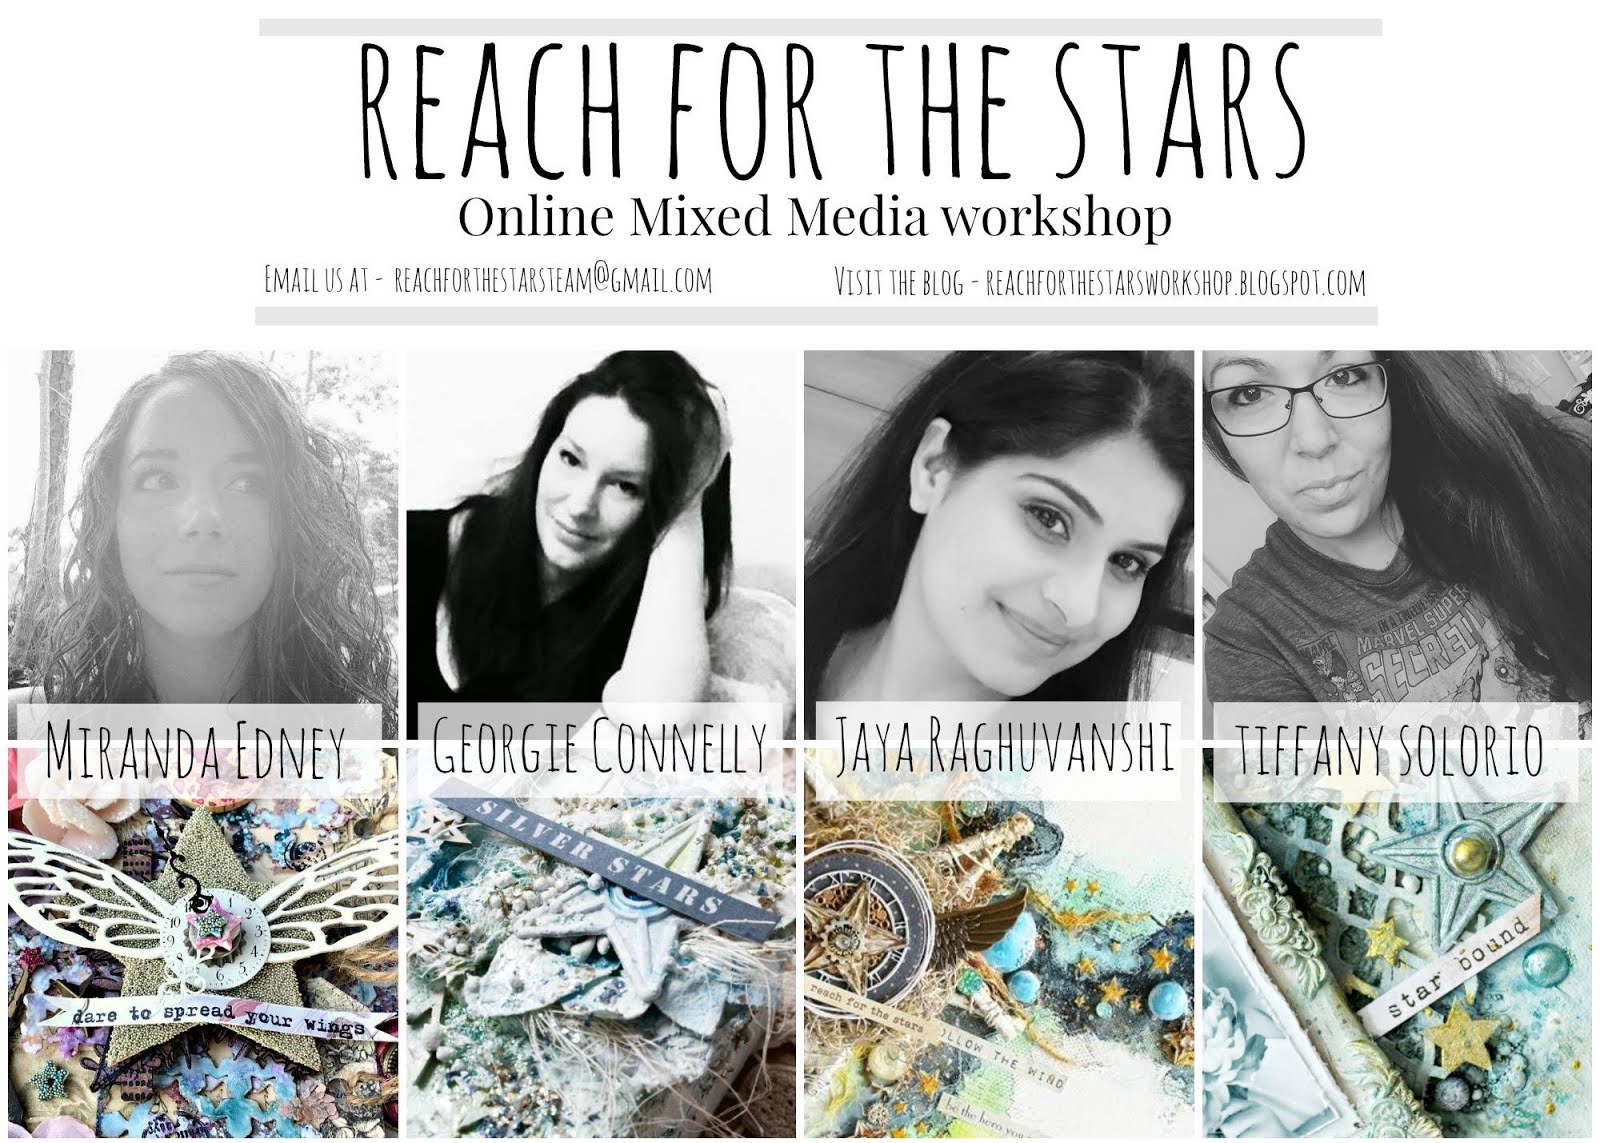 Our workshops at Reach For the Stars